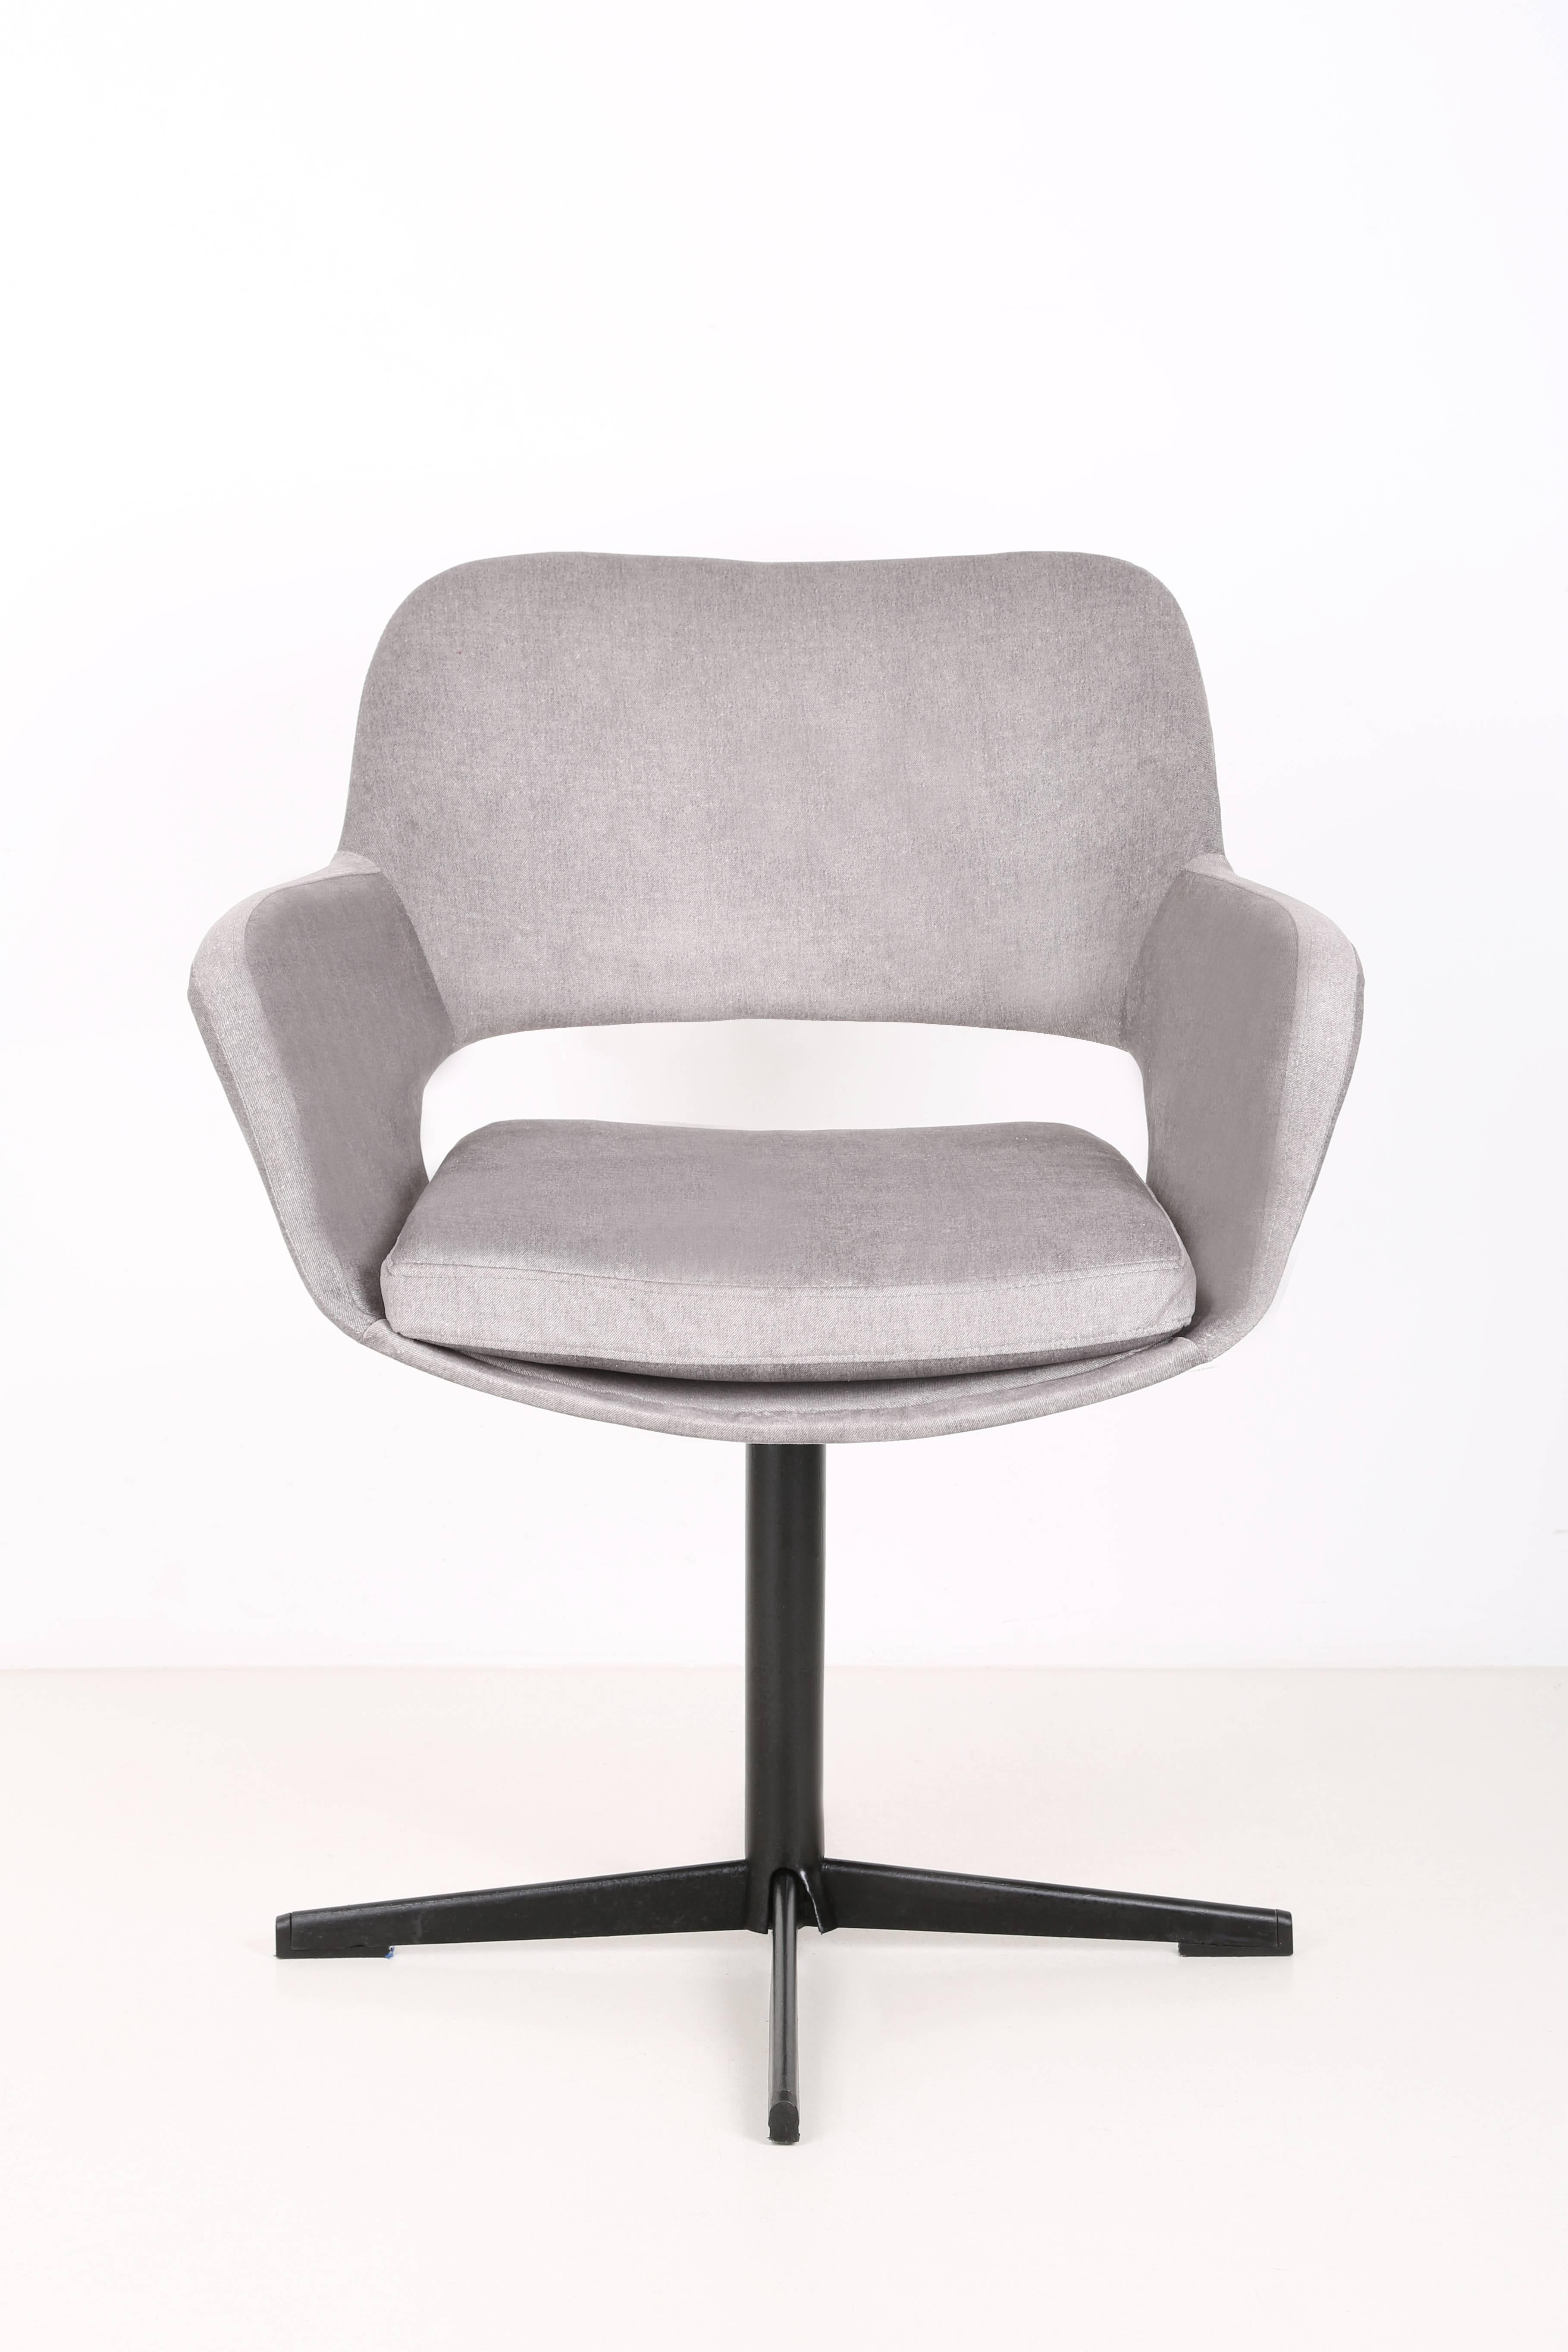 Swivel armchair from the 1970s, produced in the Silesian furniture factory in Swiebodzin - at the moment they are unique. Due to their dimensions, they perfectly blend in even in small apartments providing comfort and beautiful decoration. We can